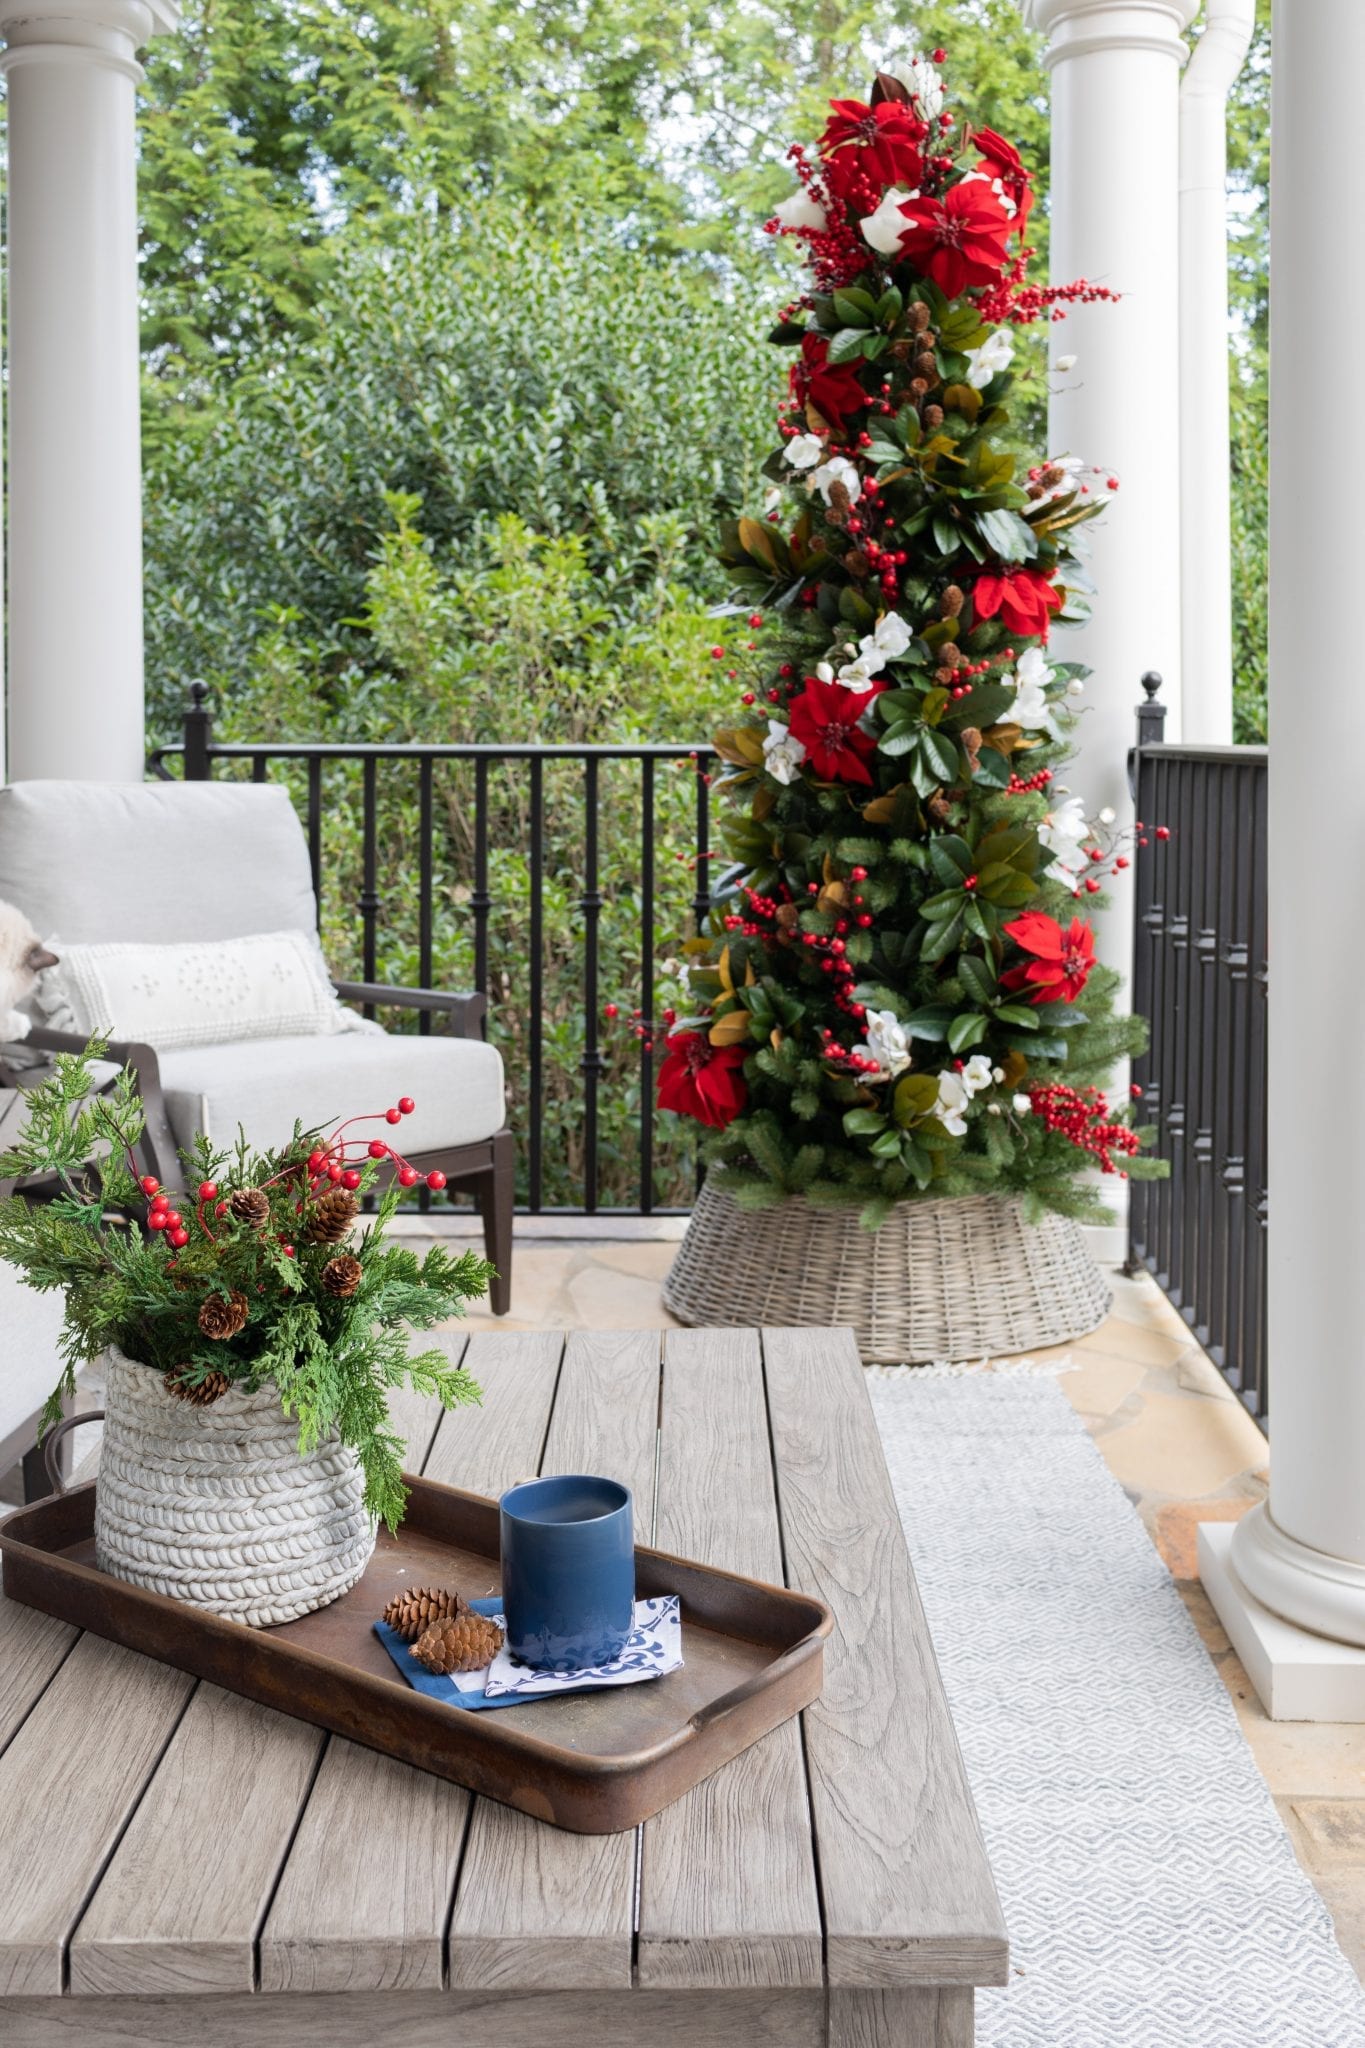 To create a simply southern Christmas, you need basic ingredients: magnolia, poinsettia & a bit of the outdoors! This magnolia tree is beautiful both inside or for balcony christmas decorations! If you need Christmas balcony ideas, this tree along with artificial poinsettia plants for outside may be just the ticket!